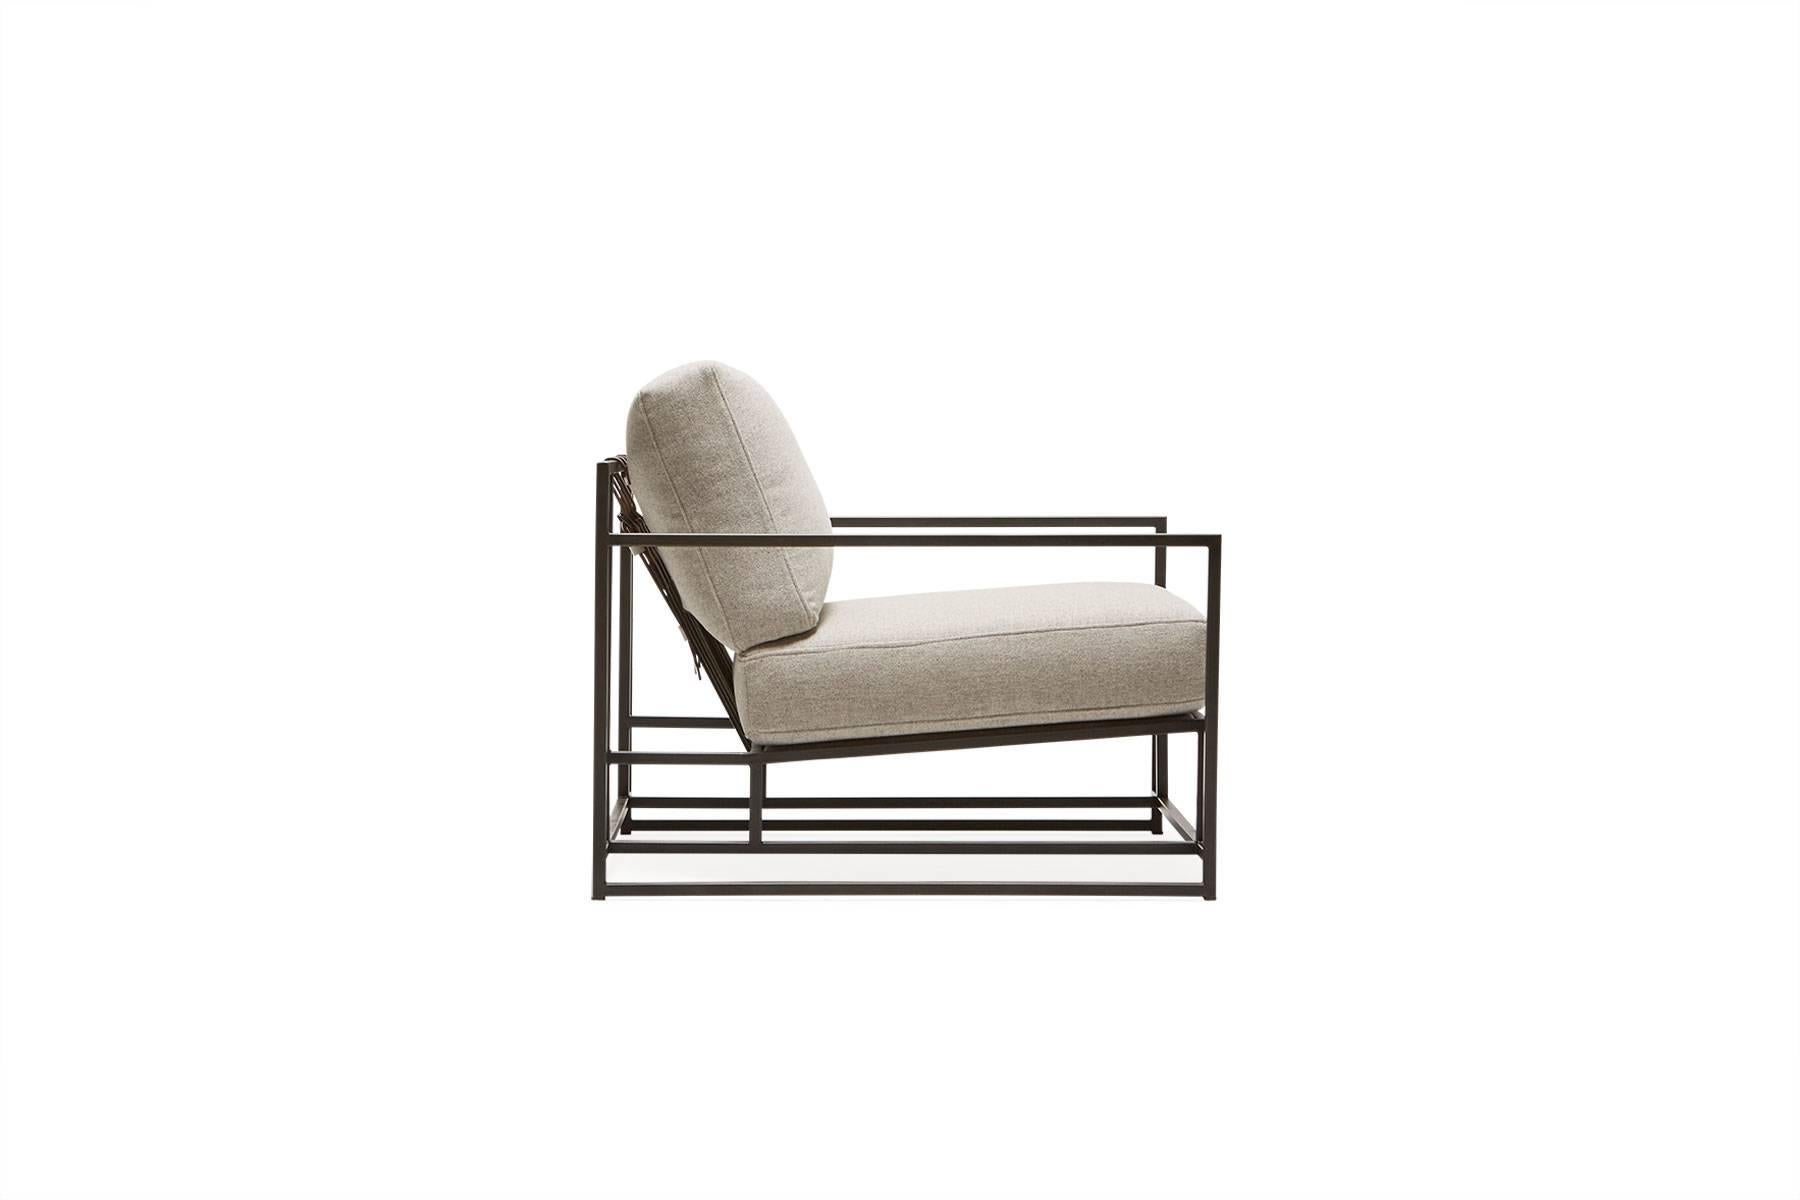 The Inheritance Armchair by Stephen Kenn is as comfortable as it is unique. The design features an exposed construction composed of three elements - a steel frame, plush upholstery, and supportive belts. The deep seating area is perfect for a